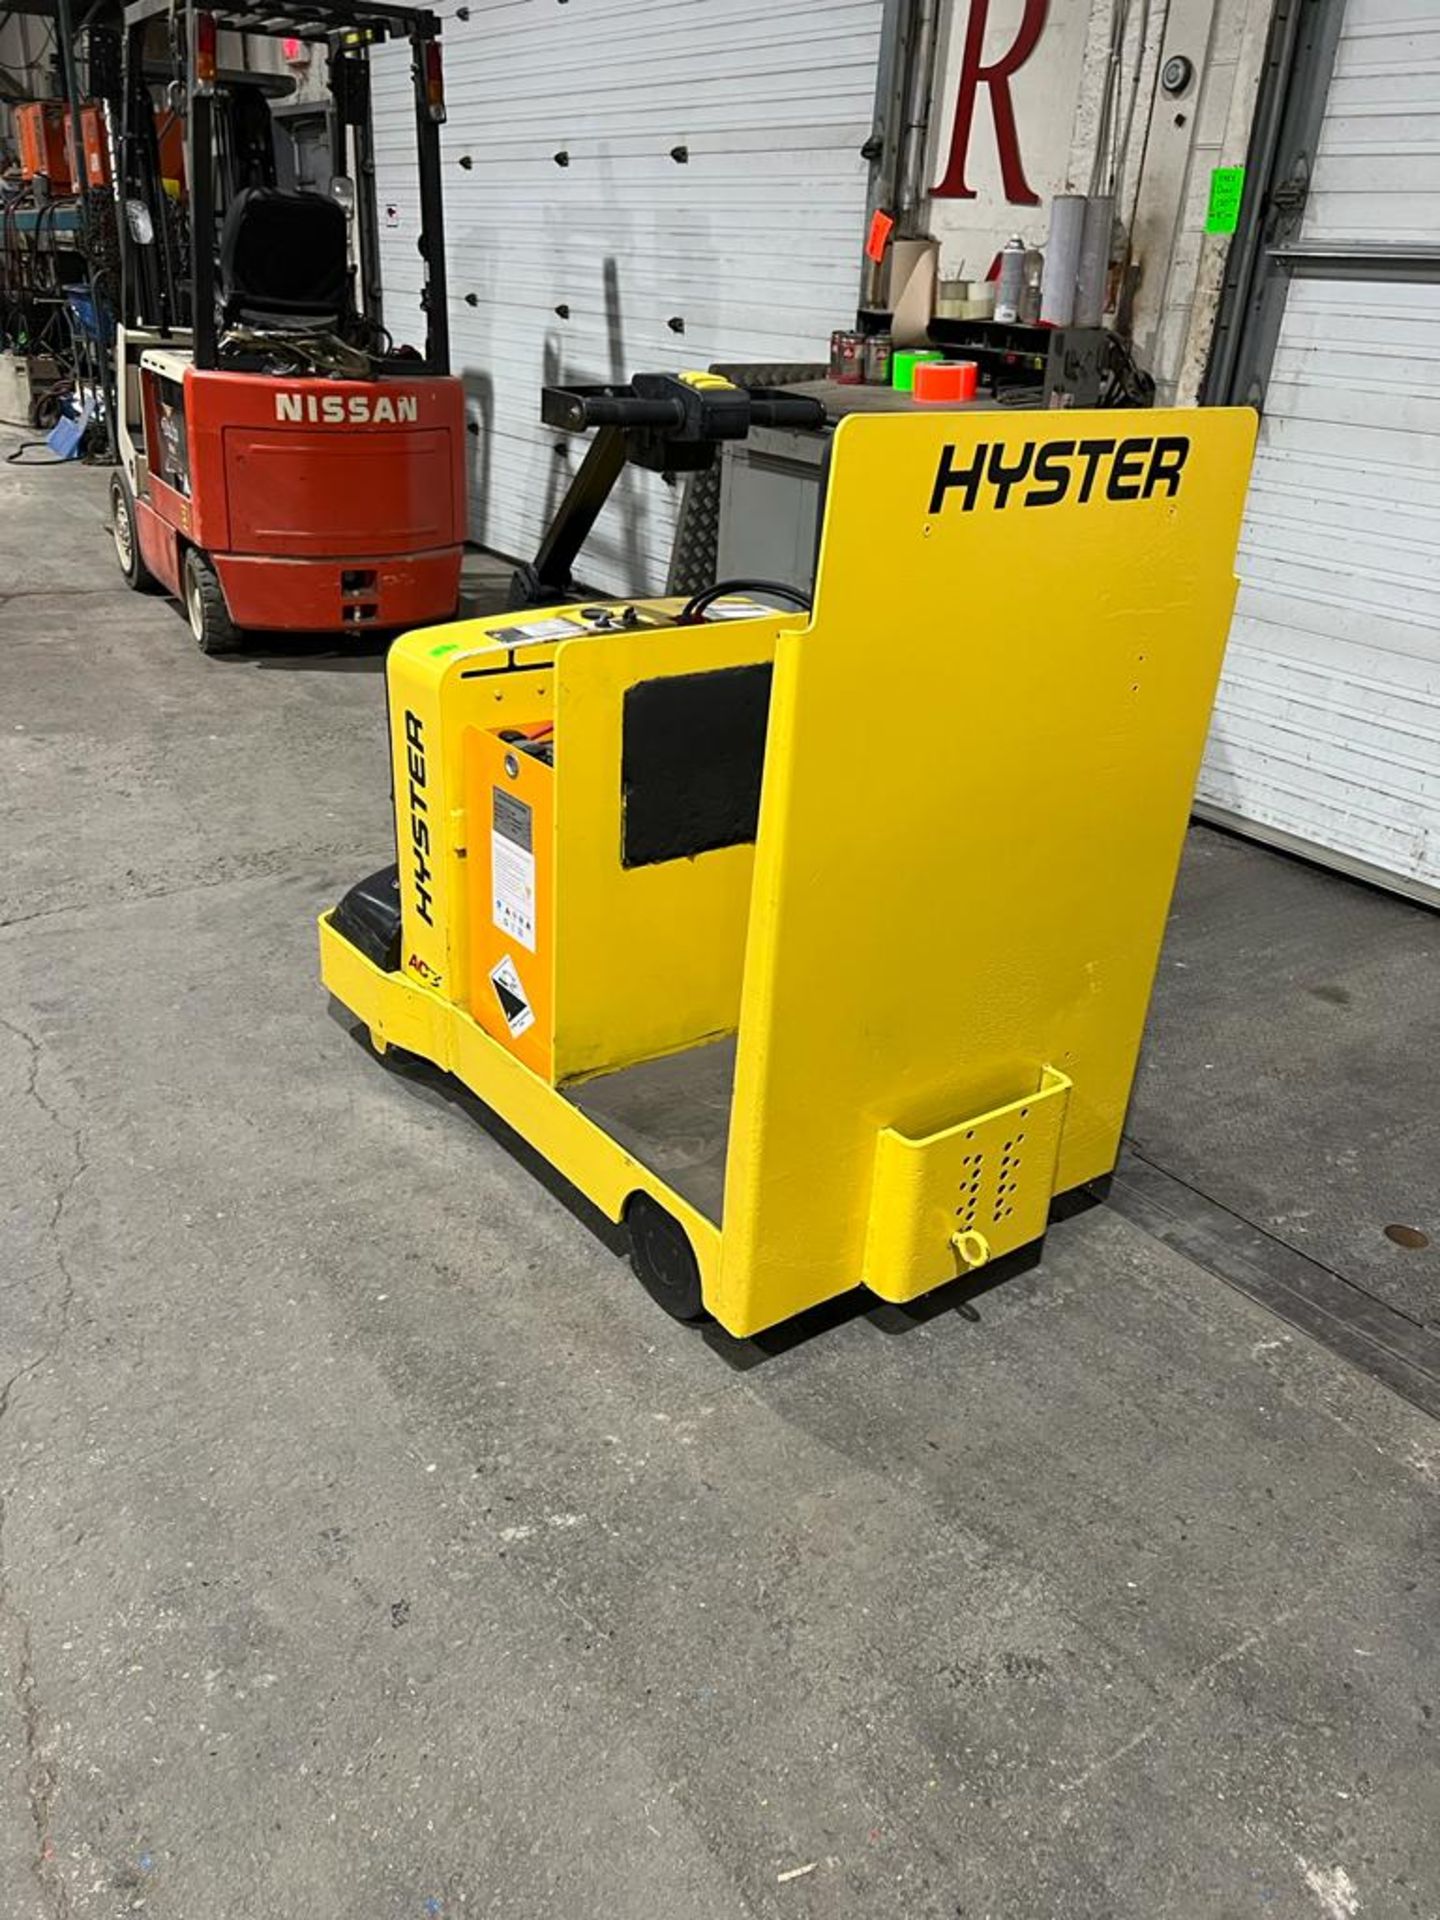 2012 Hyster Ride On Tow Tractor - Tugger / Personal Carrier NEW 24V Battery Electric Unit - Image 4 of 4